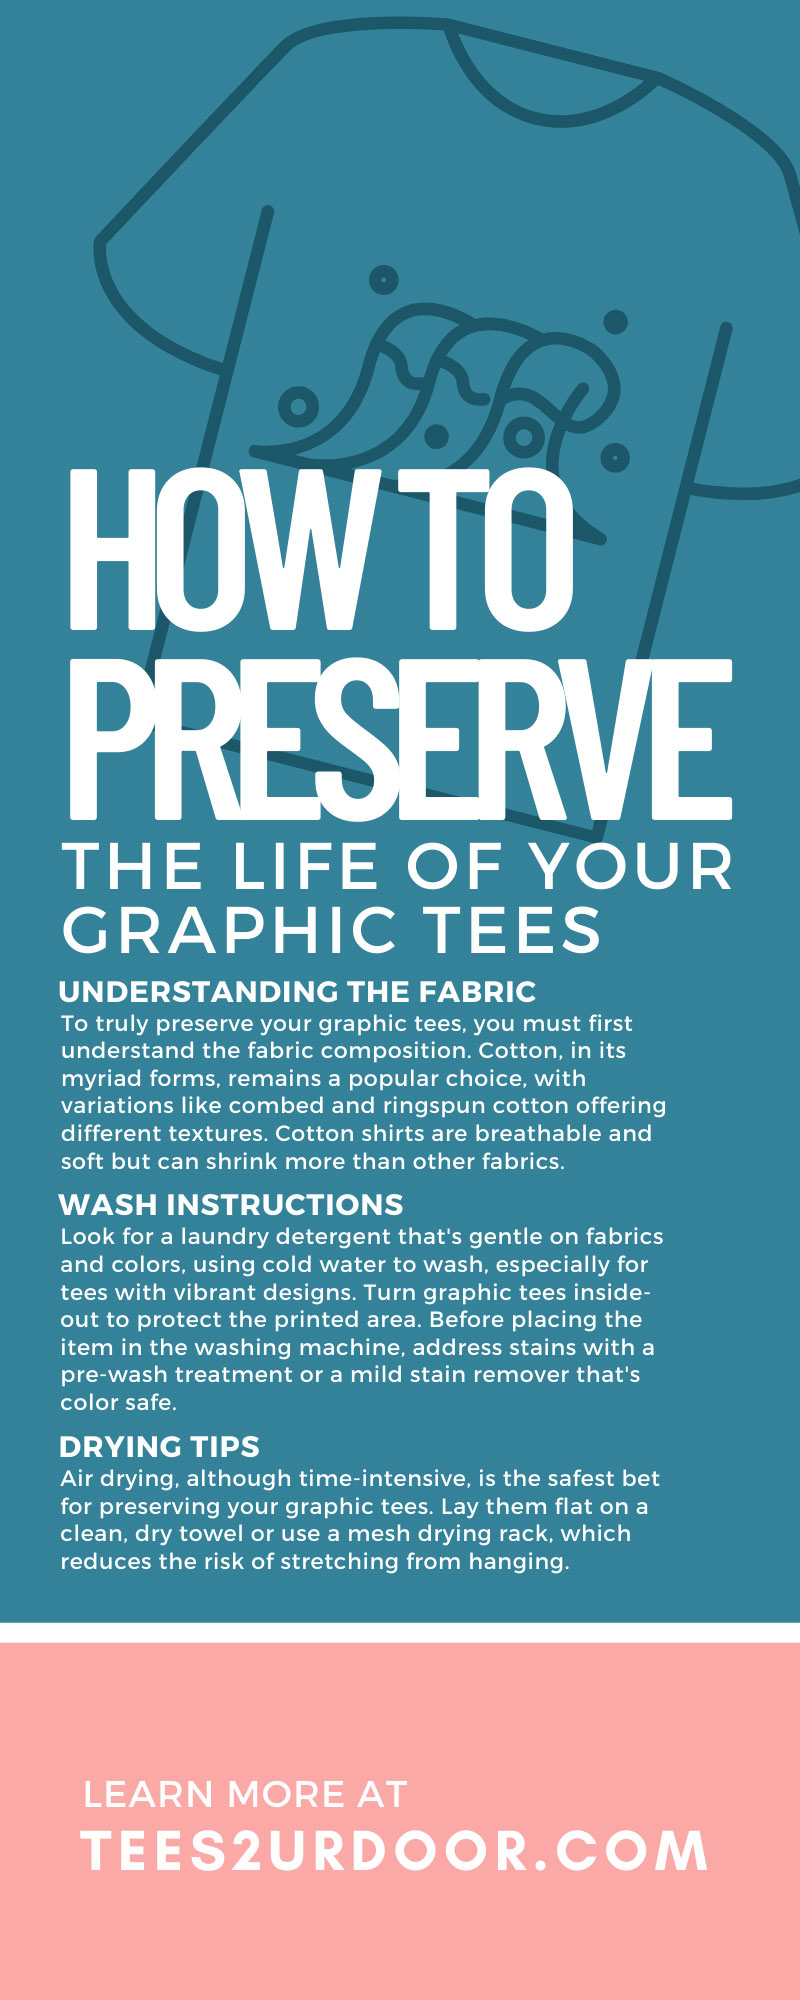 How To Preserve the Life of Your Graphic Tees